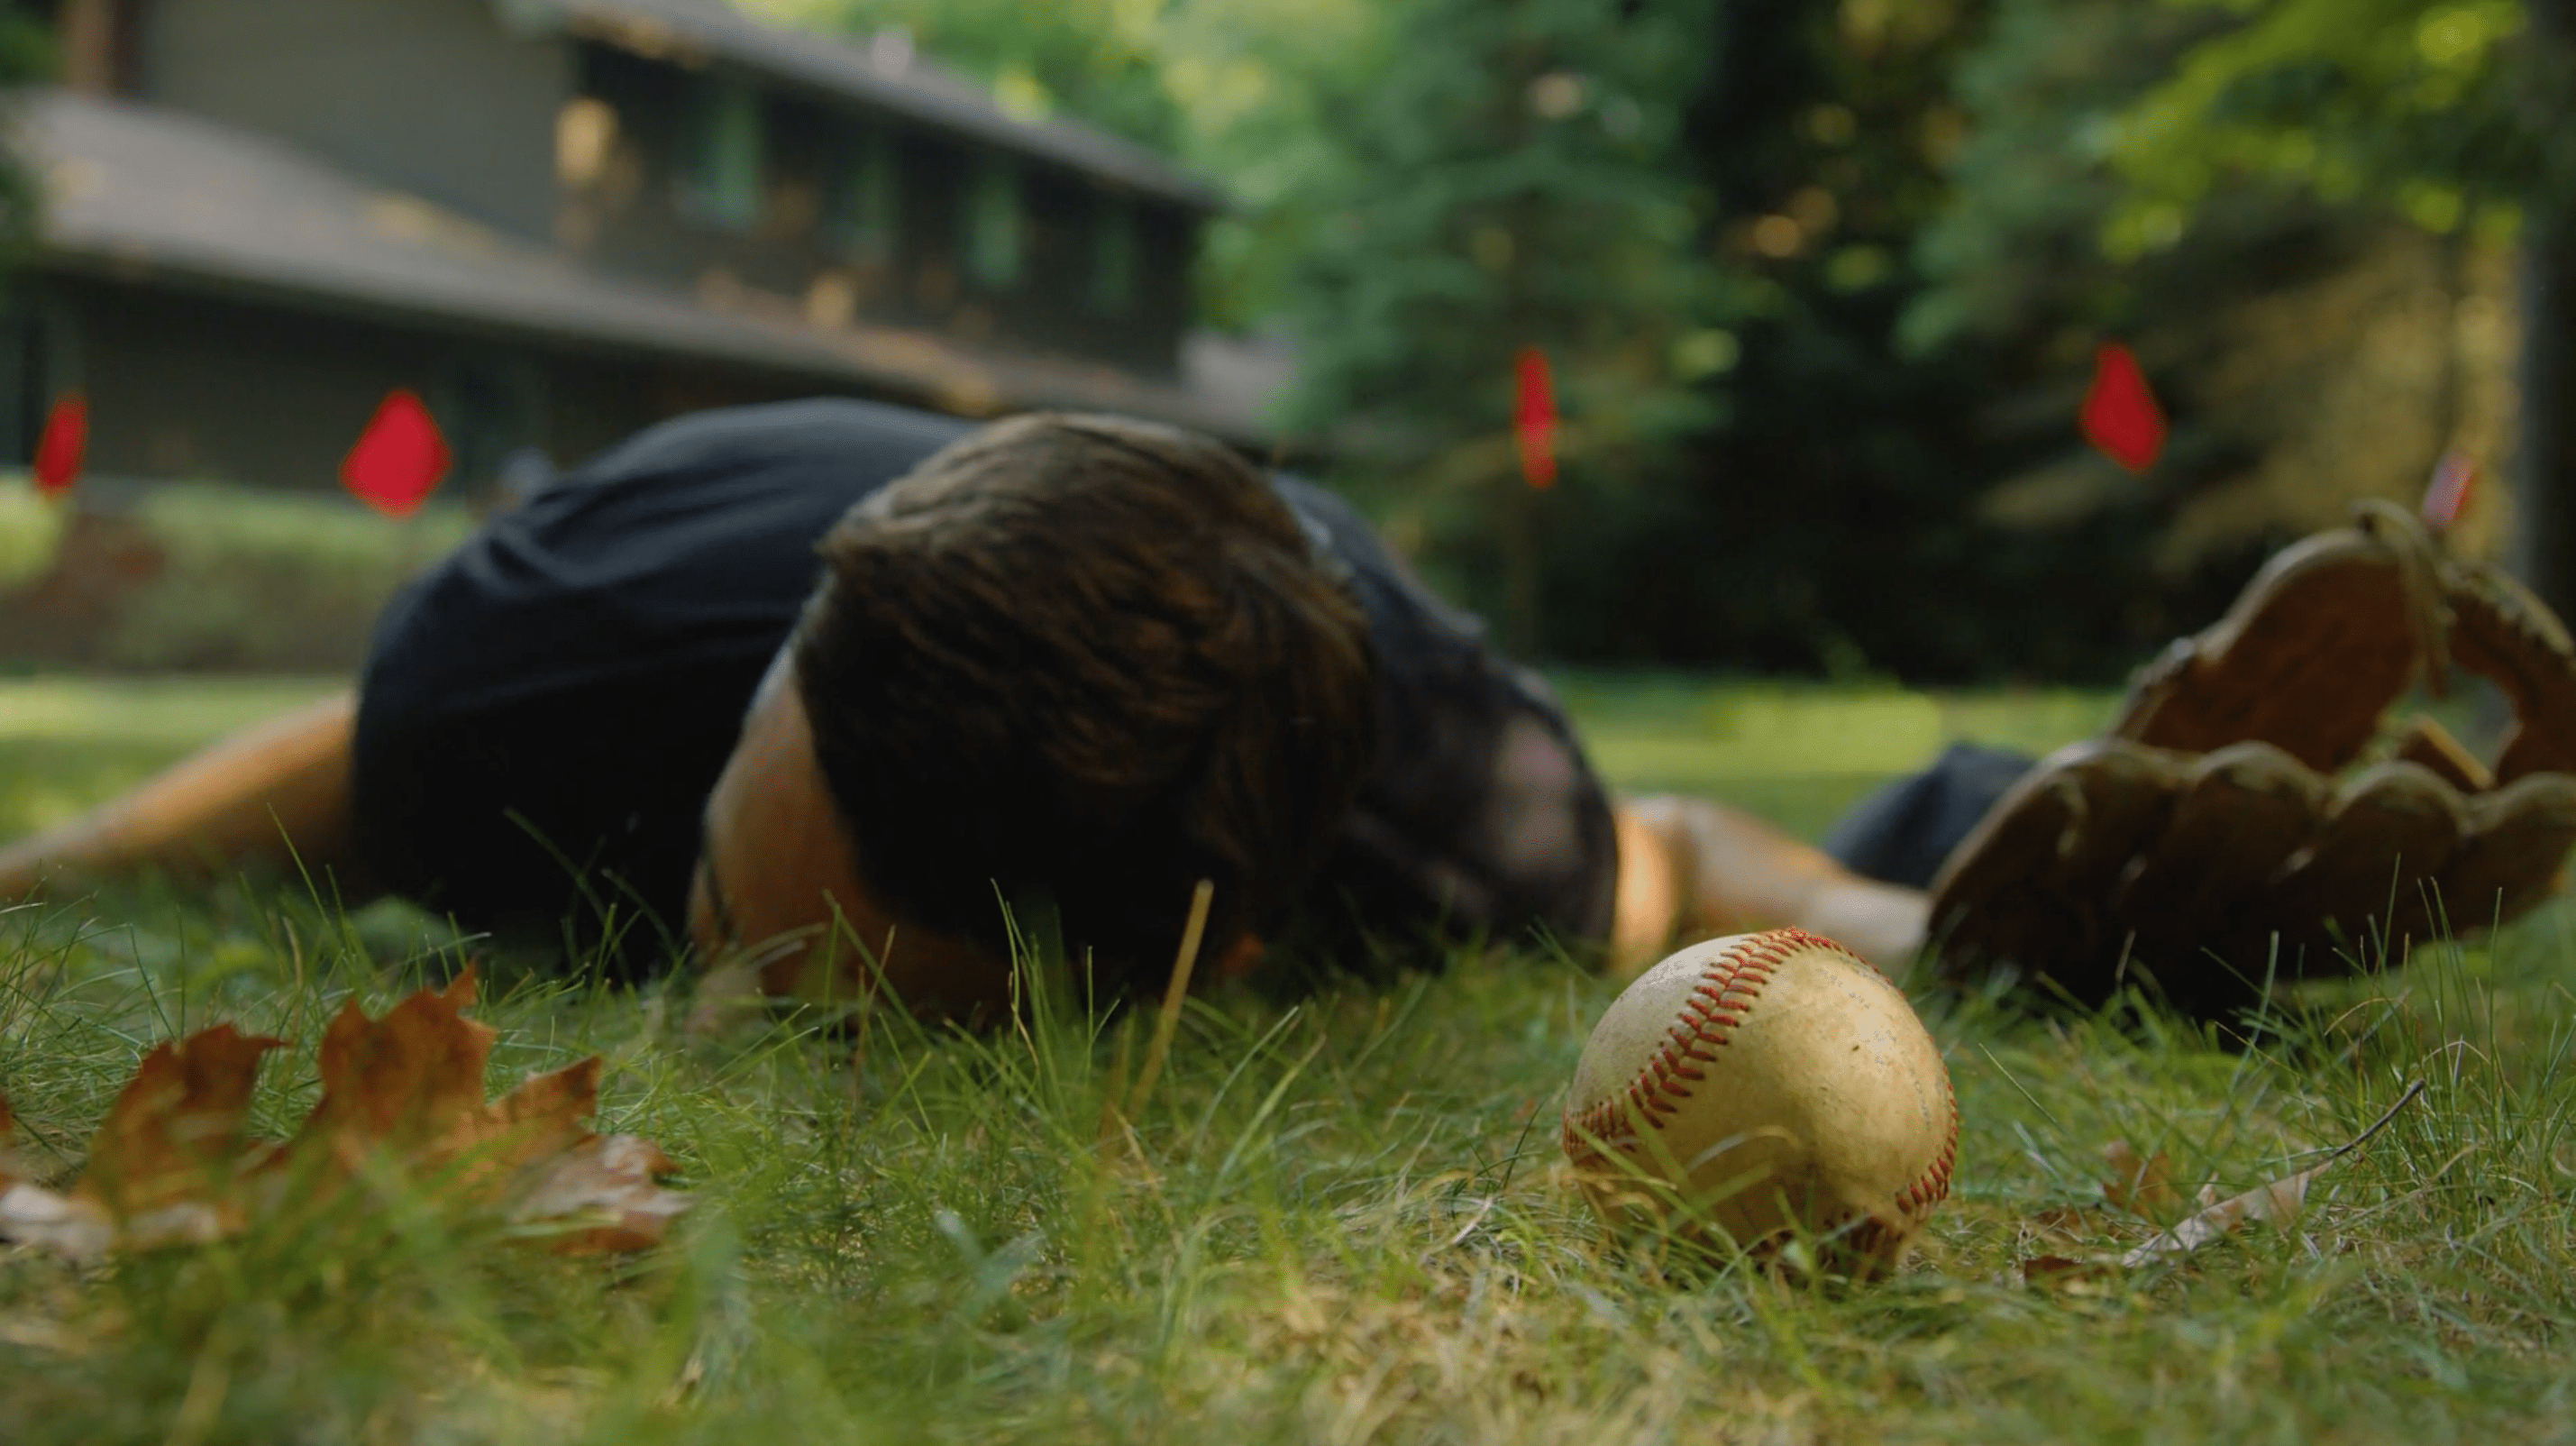 A man laying on the ground next to a baseball after being shocked by a dog fence.